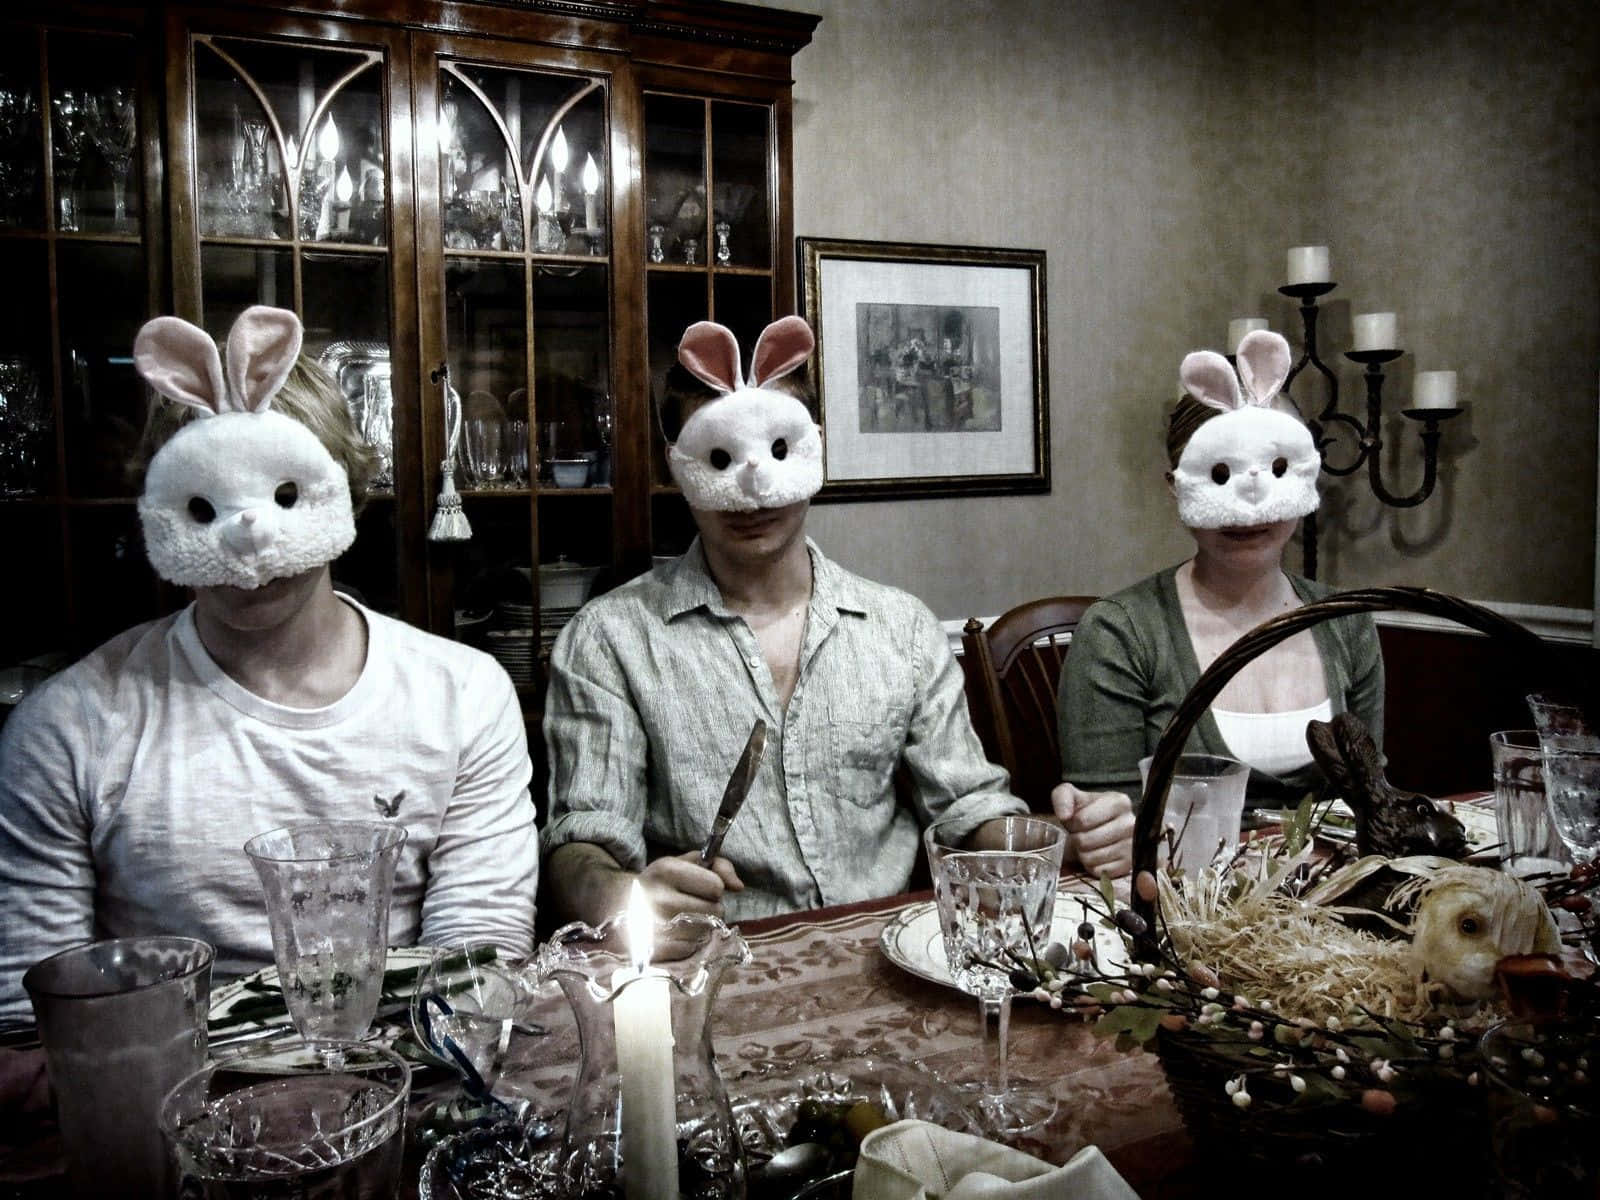 "The Creepy Easter Bunny isn't all sugar and spice."